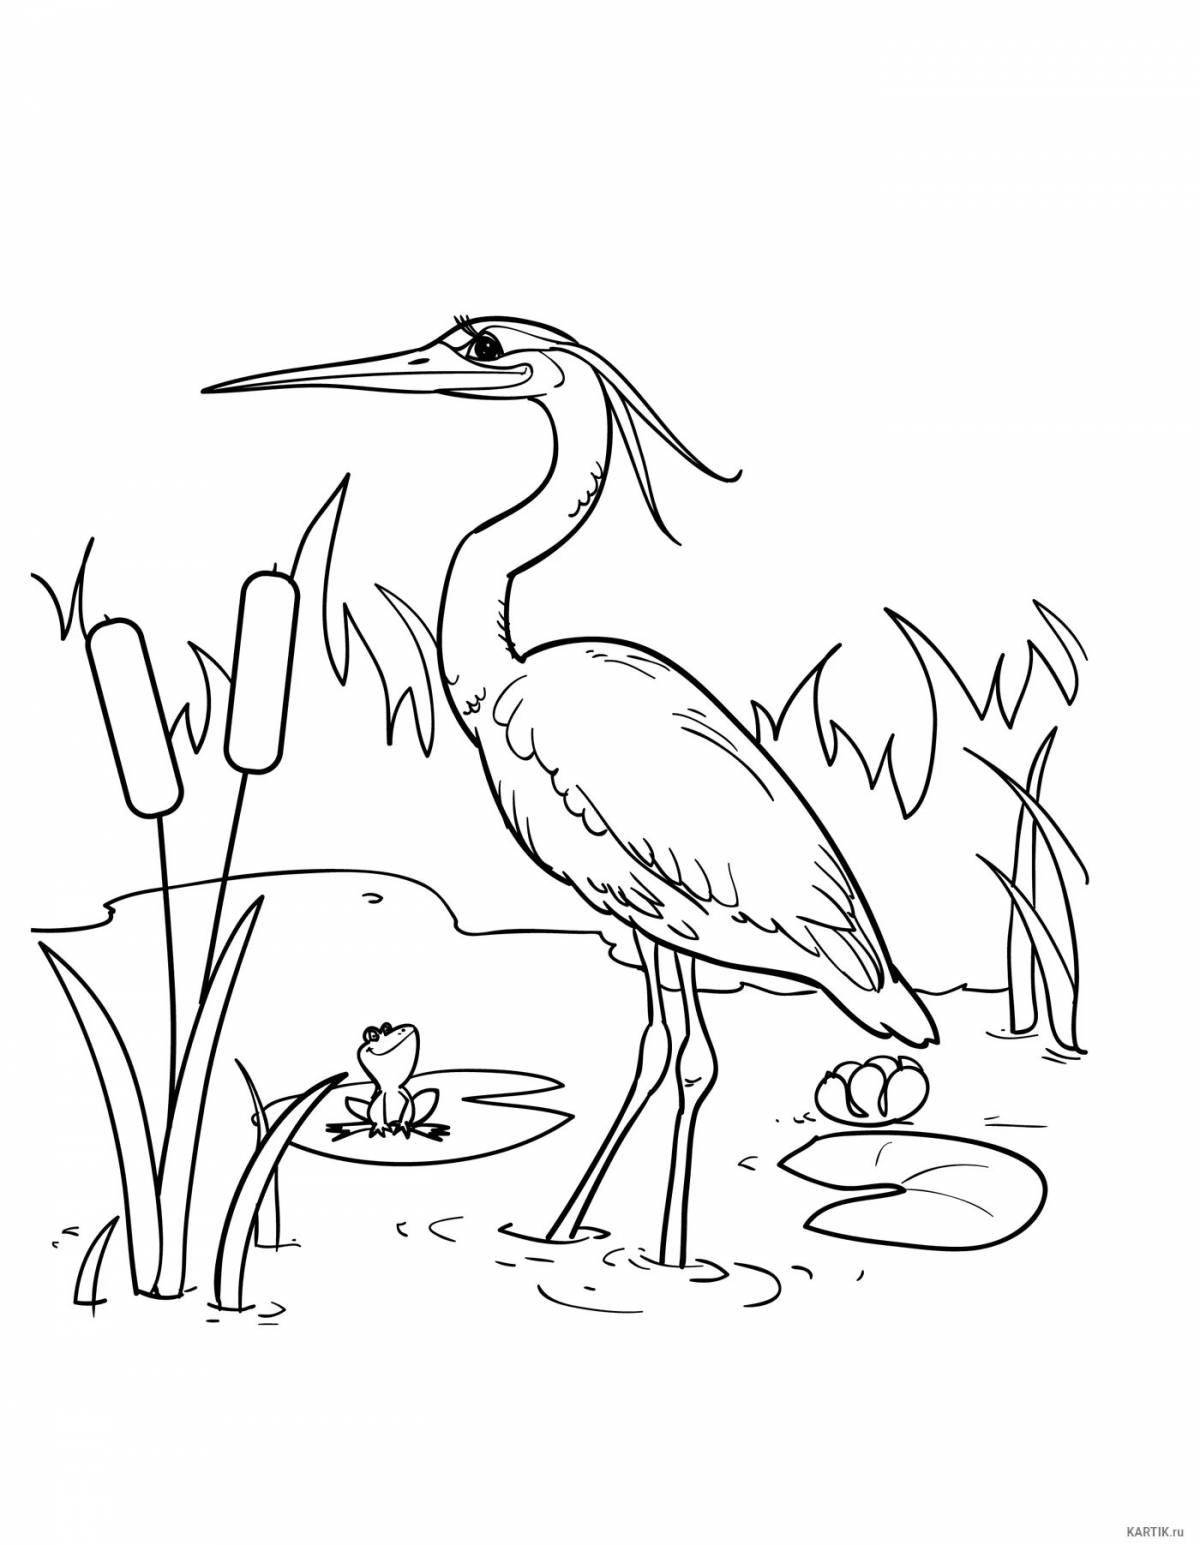 A wonderful heron coloring book for kids